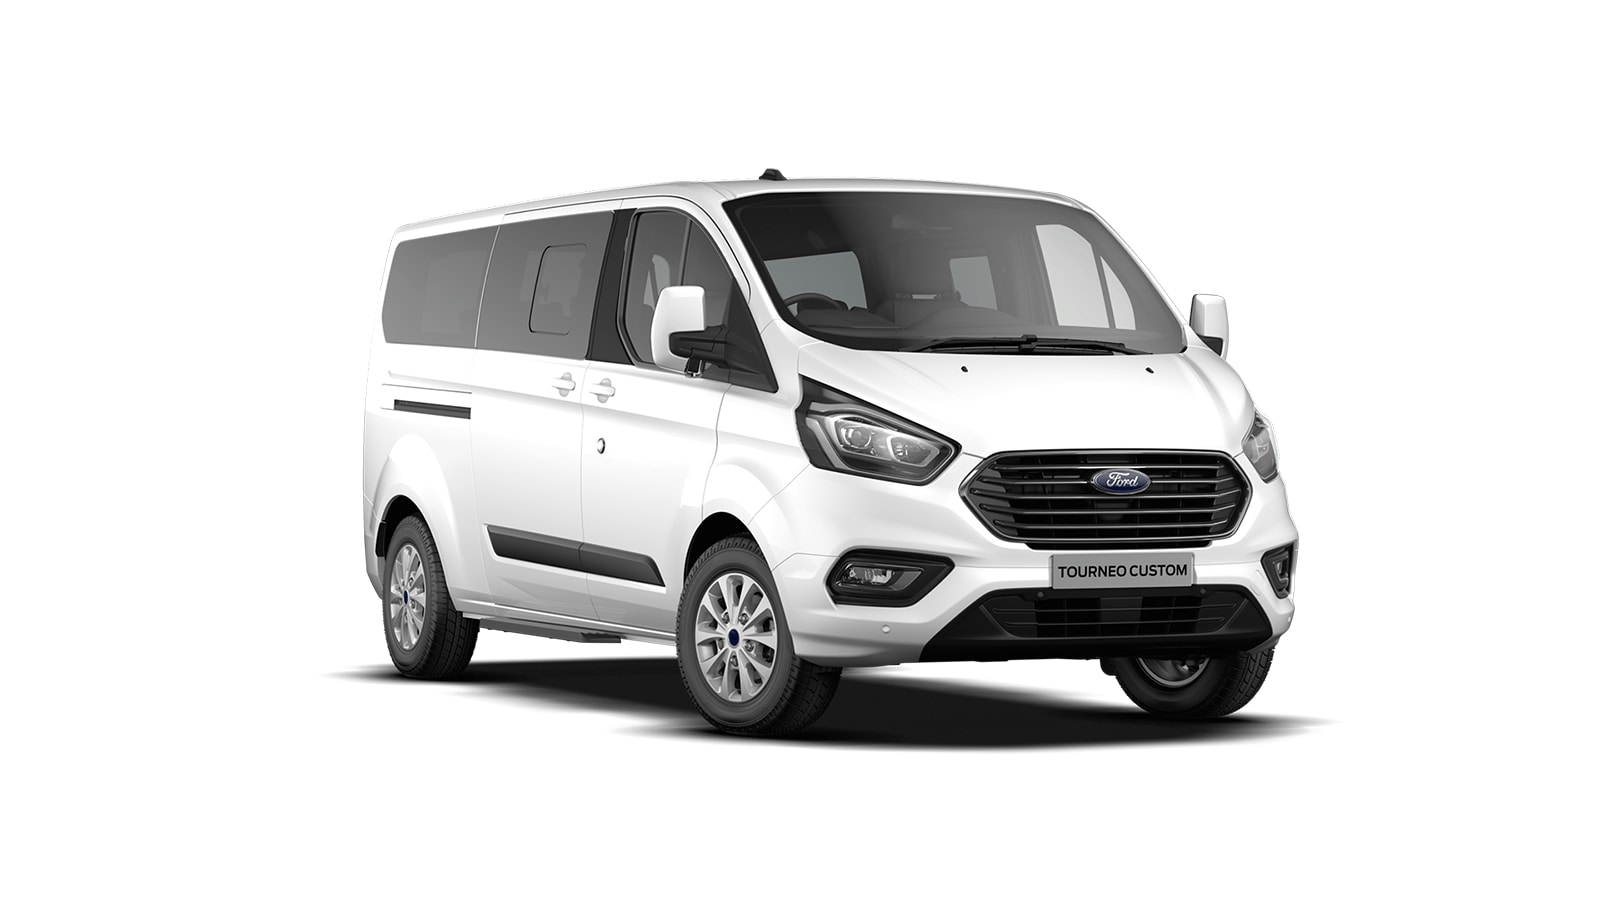 All-New Ford Tourneo Custom at RGR Garages